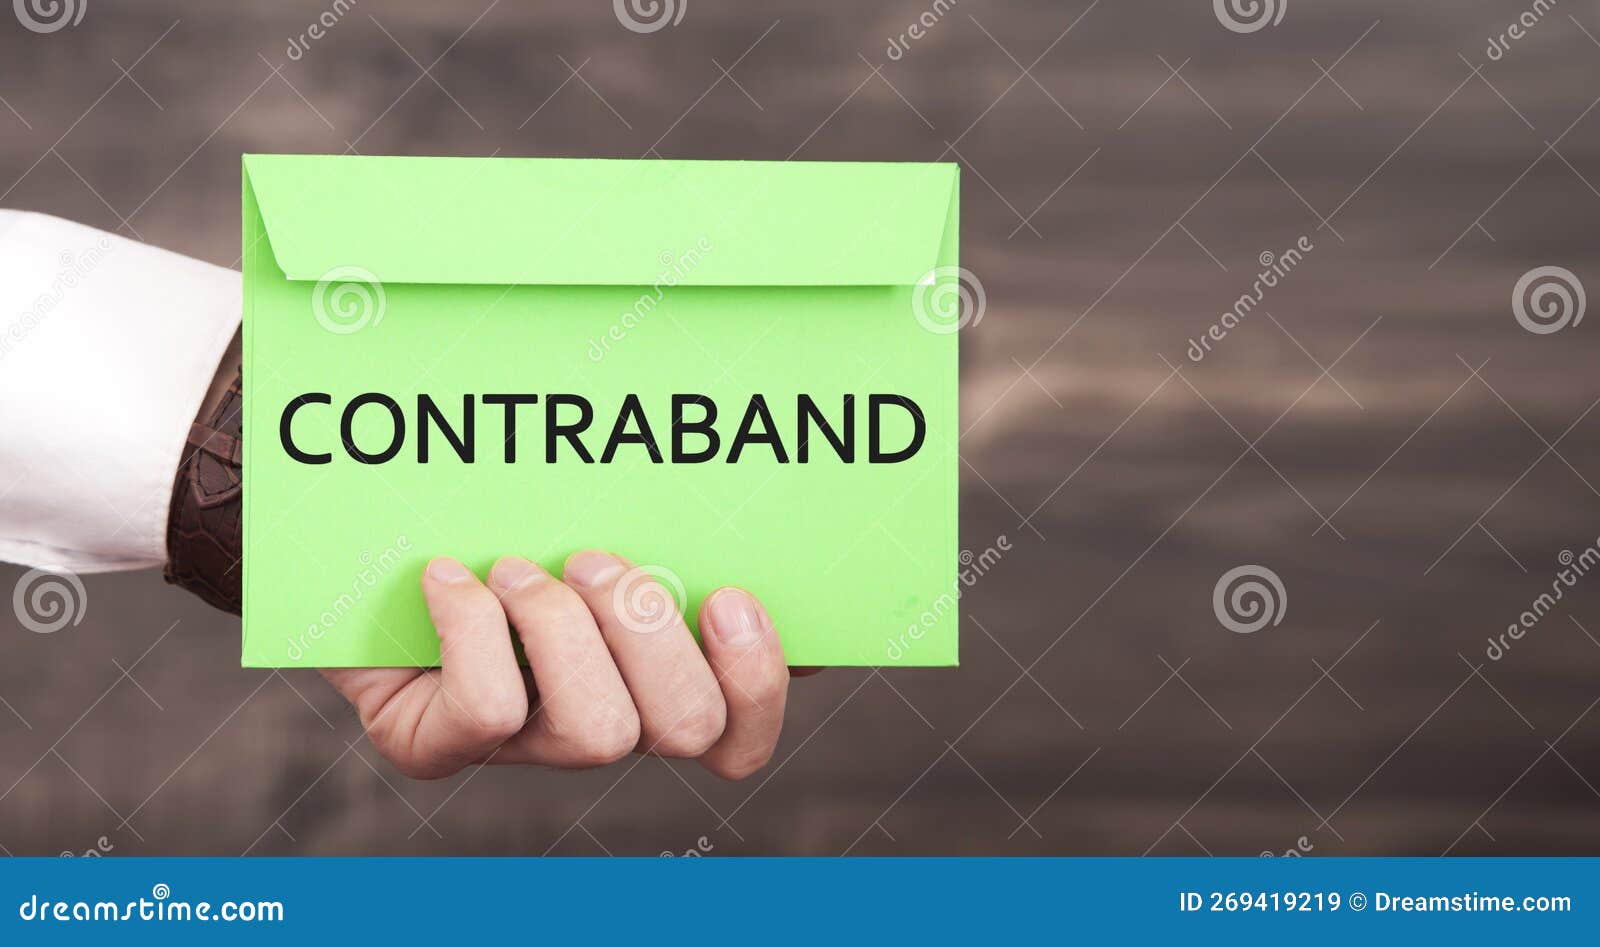 man showing contraband word on paper